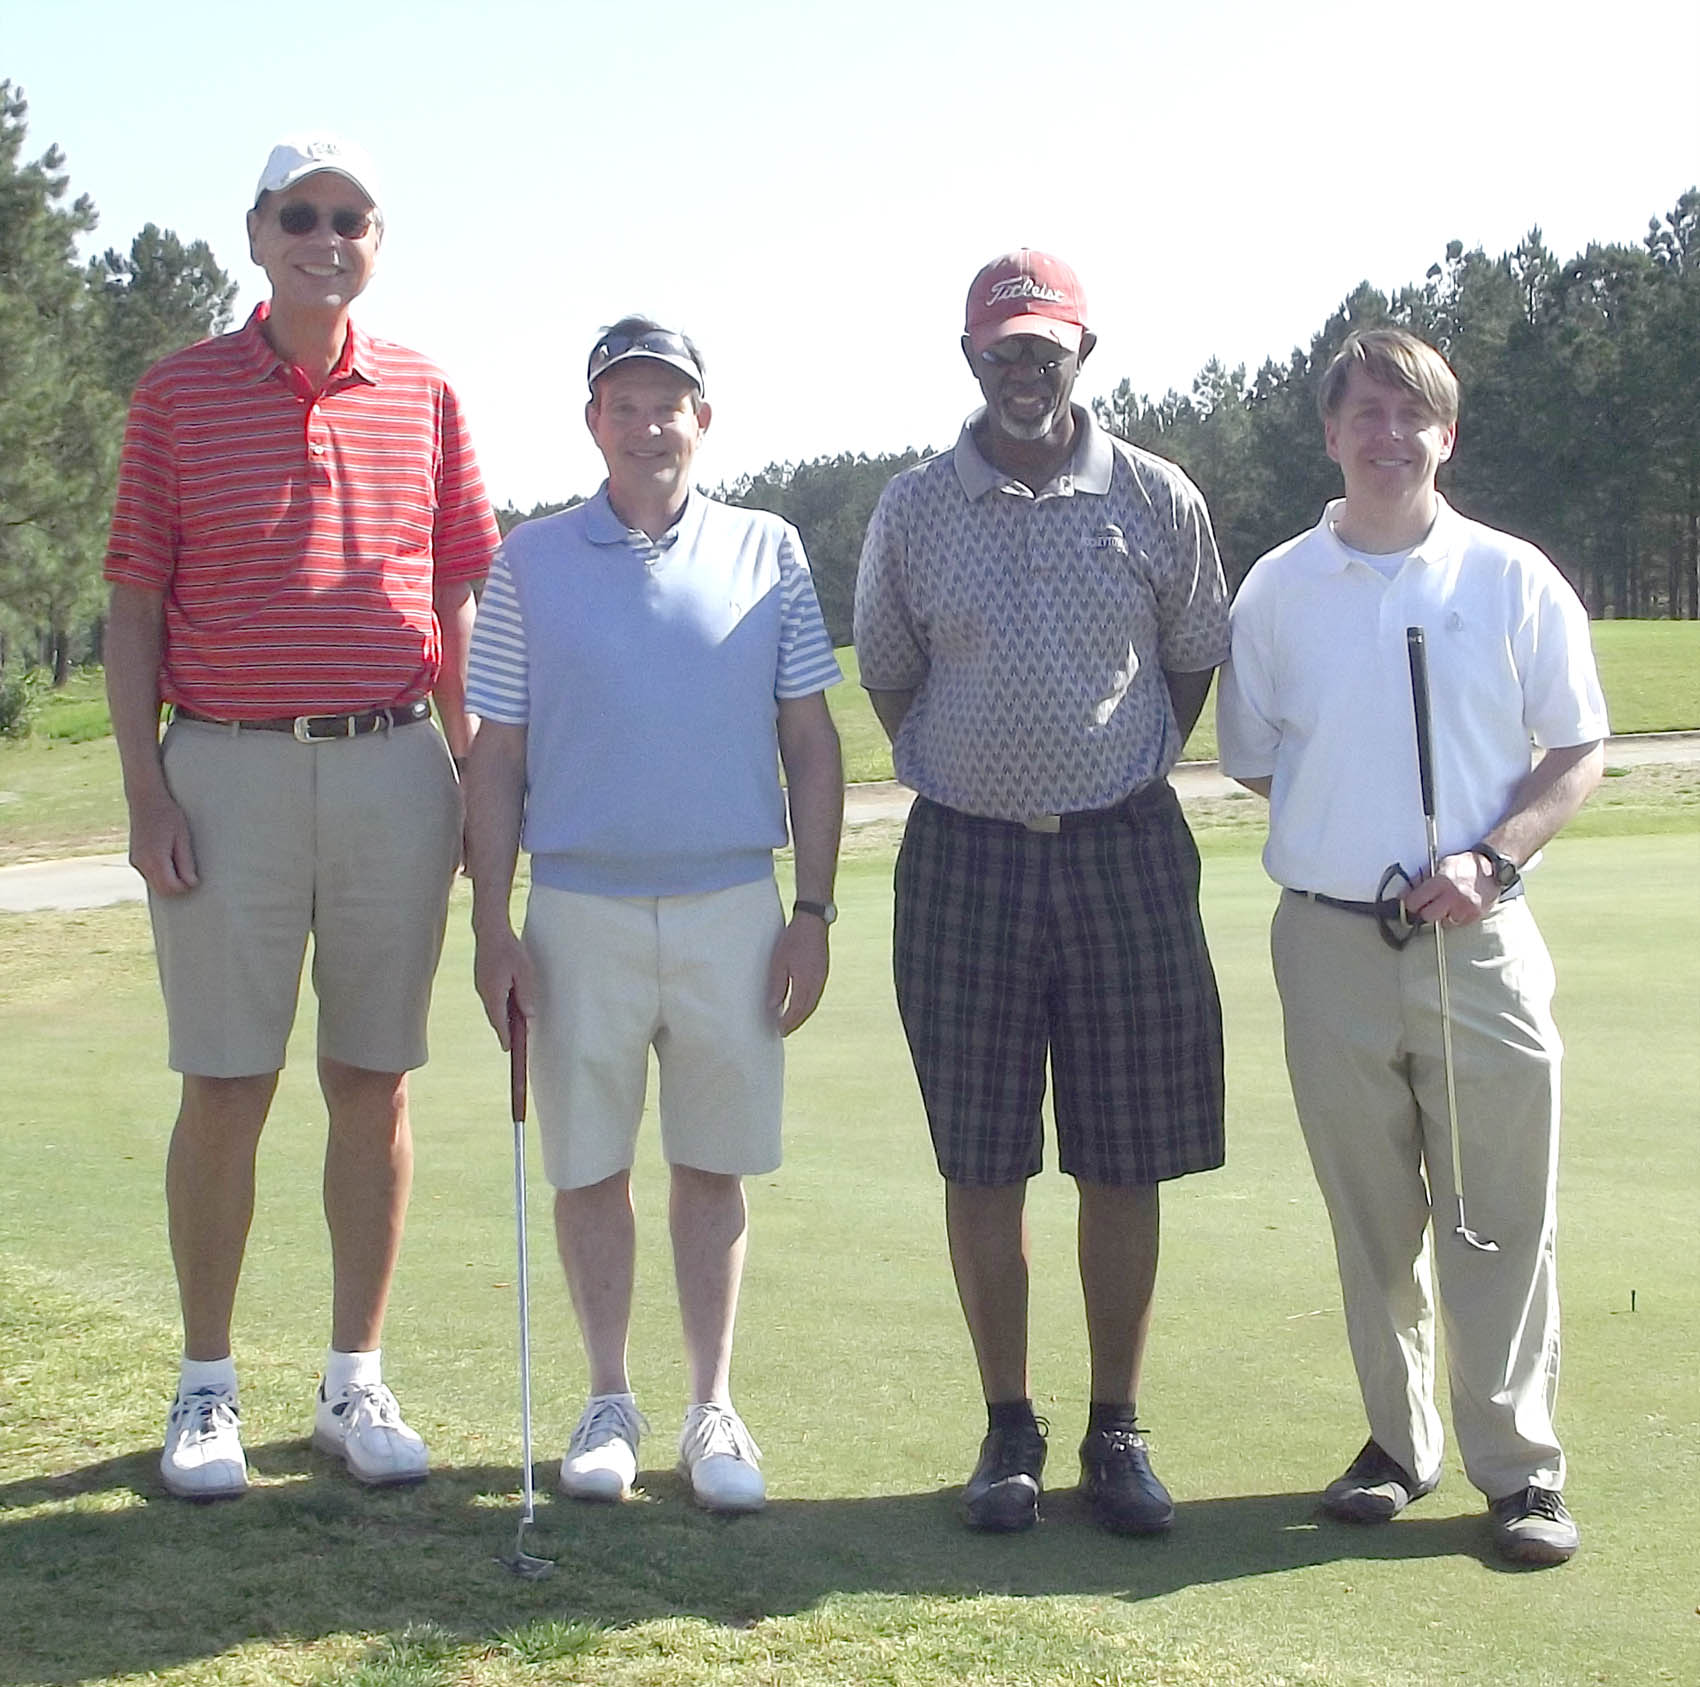 Click to enlarge,  Members of the third flight winning team in the fifth Central Carolina Community College Foundation Chatham Golf Classic were Barber Holmes, Mark Hall, Neil Peterson, and Lee Wilson. For information about the Foundation, donating to it, establishing a scholarship, or other fund-raising events, contact Dr. Emily Hare, Executive Director of the CCCC Foundation, 919-718-7230, or ehare@cccc.edu. Information is also available at the CCCC Foundation website, www.cccc.edu/foundation. 